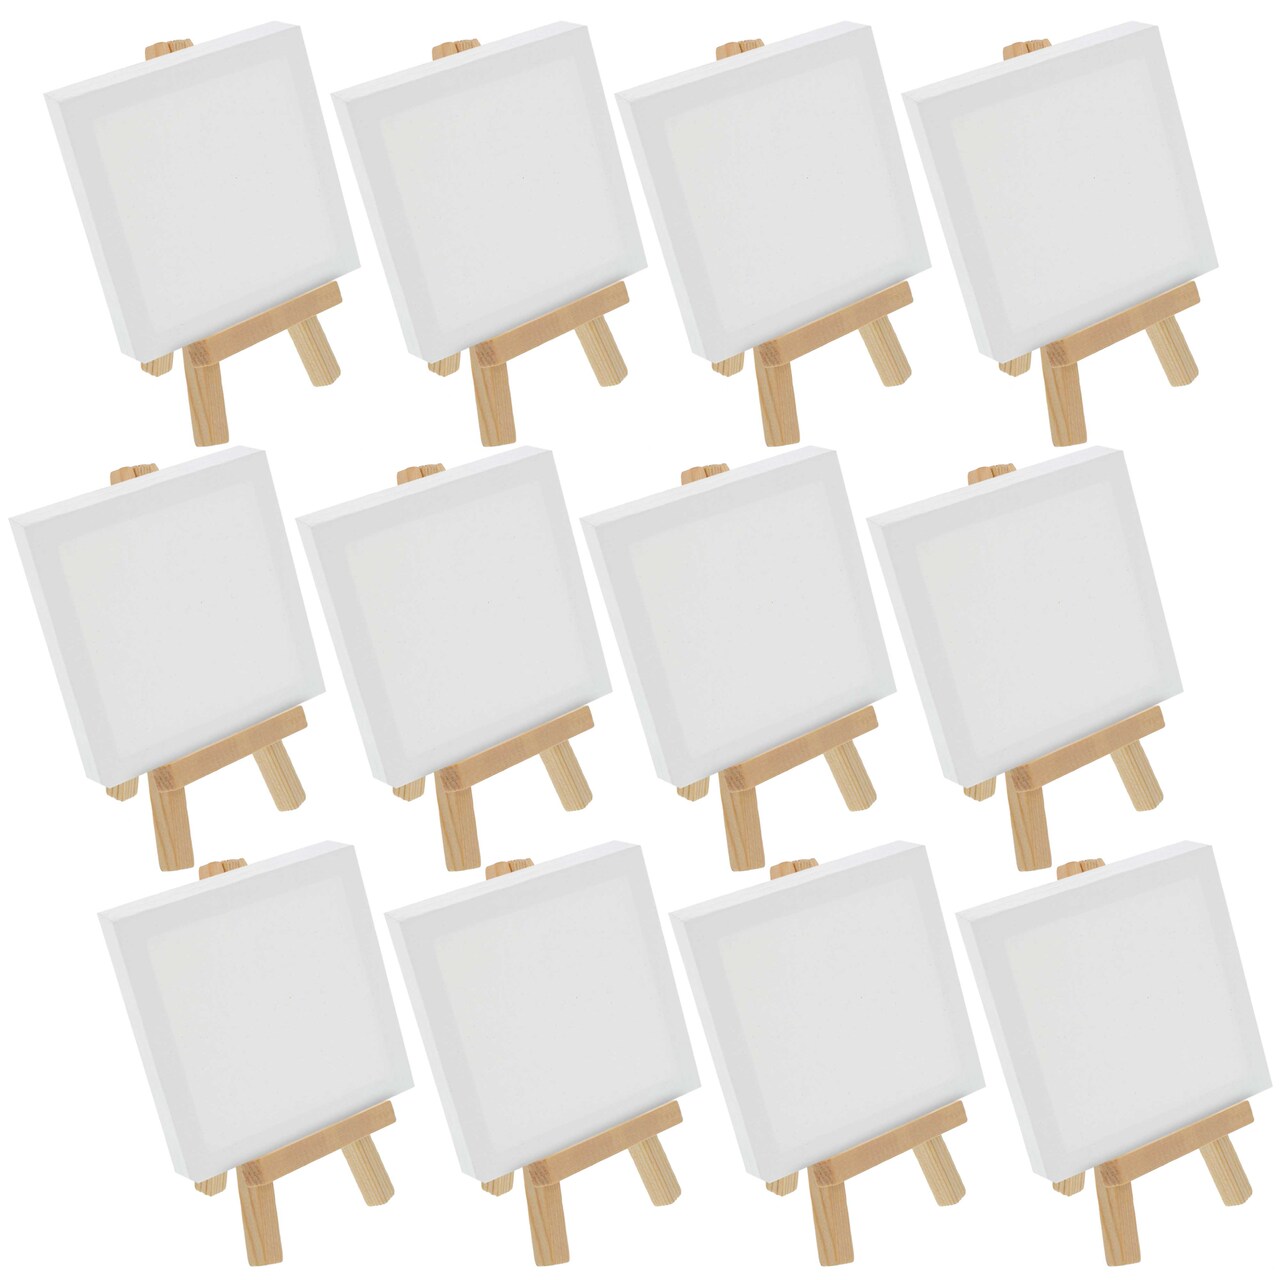 3&#x22; x 3&#x22; Stretched Canvas with 5&#x22; Mini Natural Wood Display Easel Kit, 12 Pack - Artist Tripod Tabletop Holder Stand - Kids Painting Party Oil Acrylic